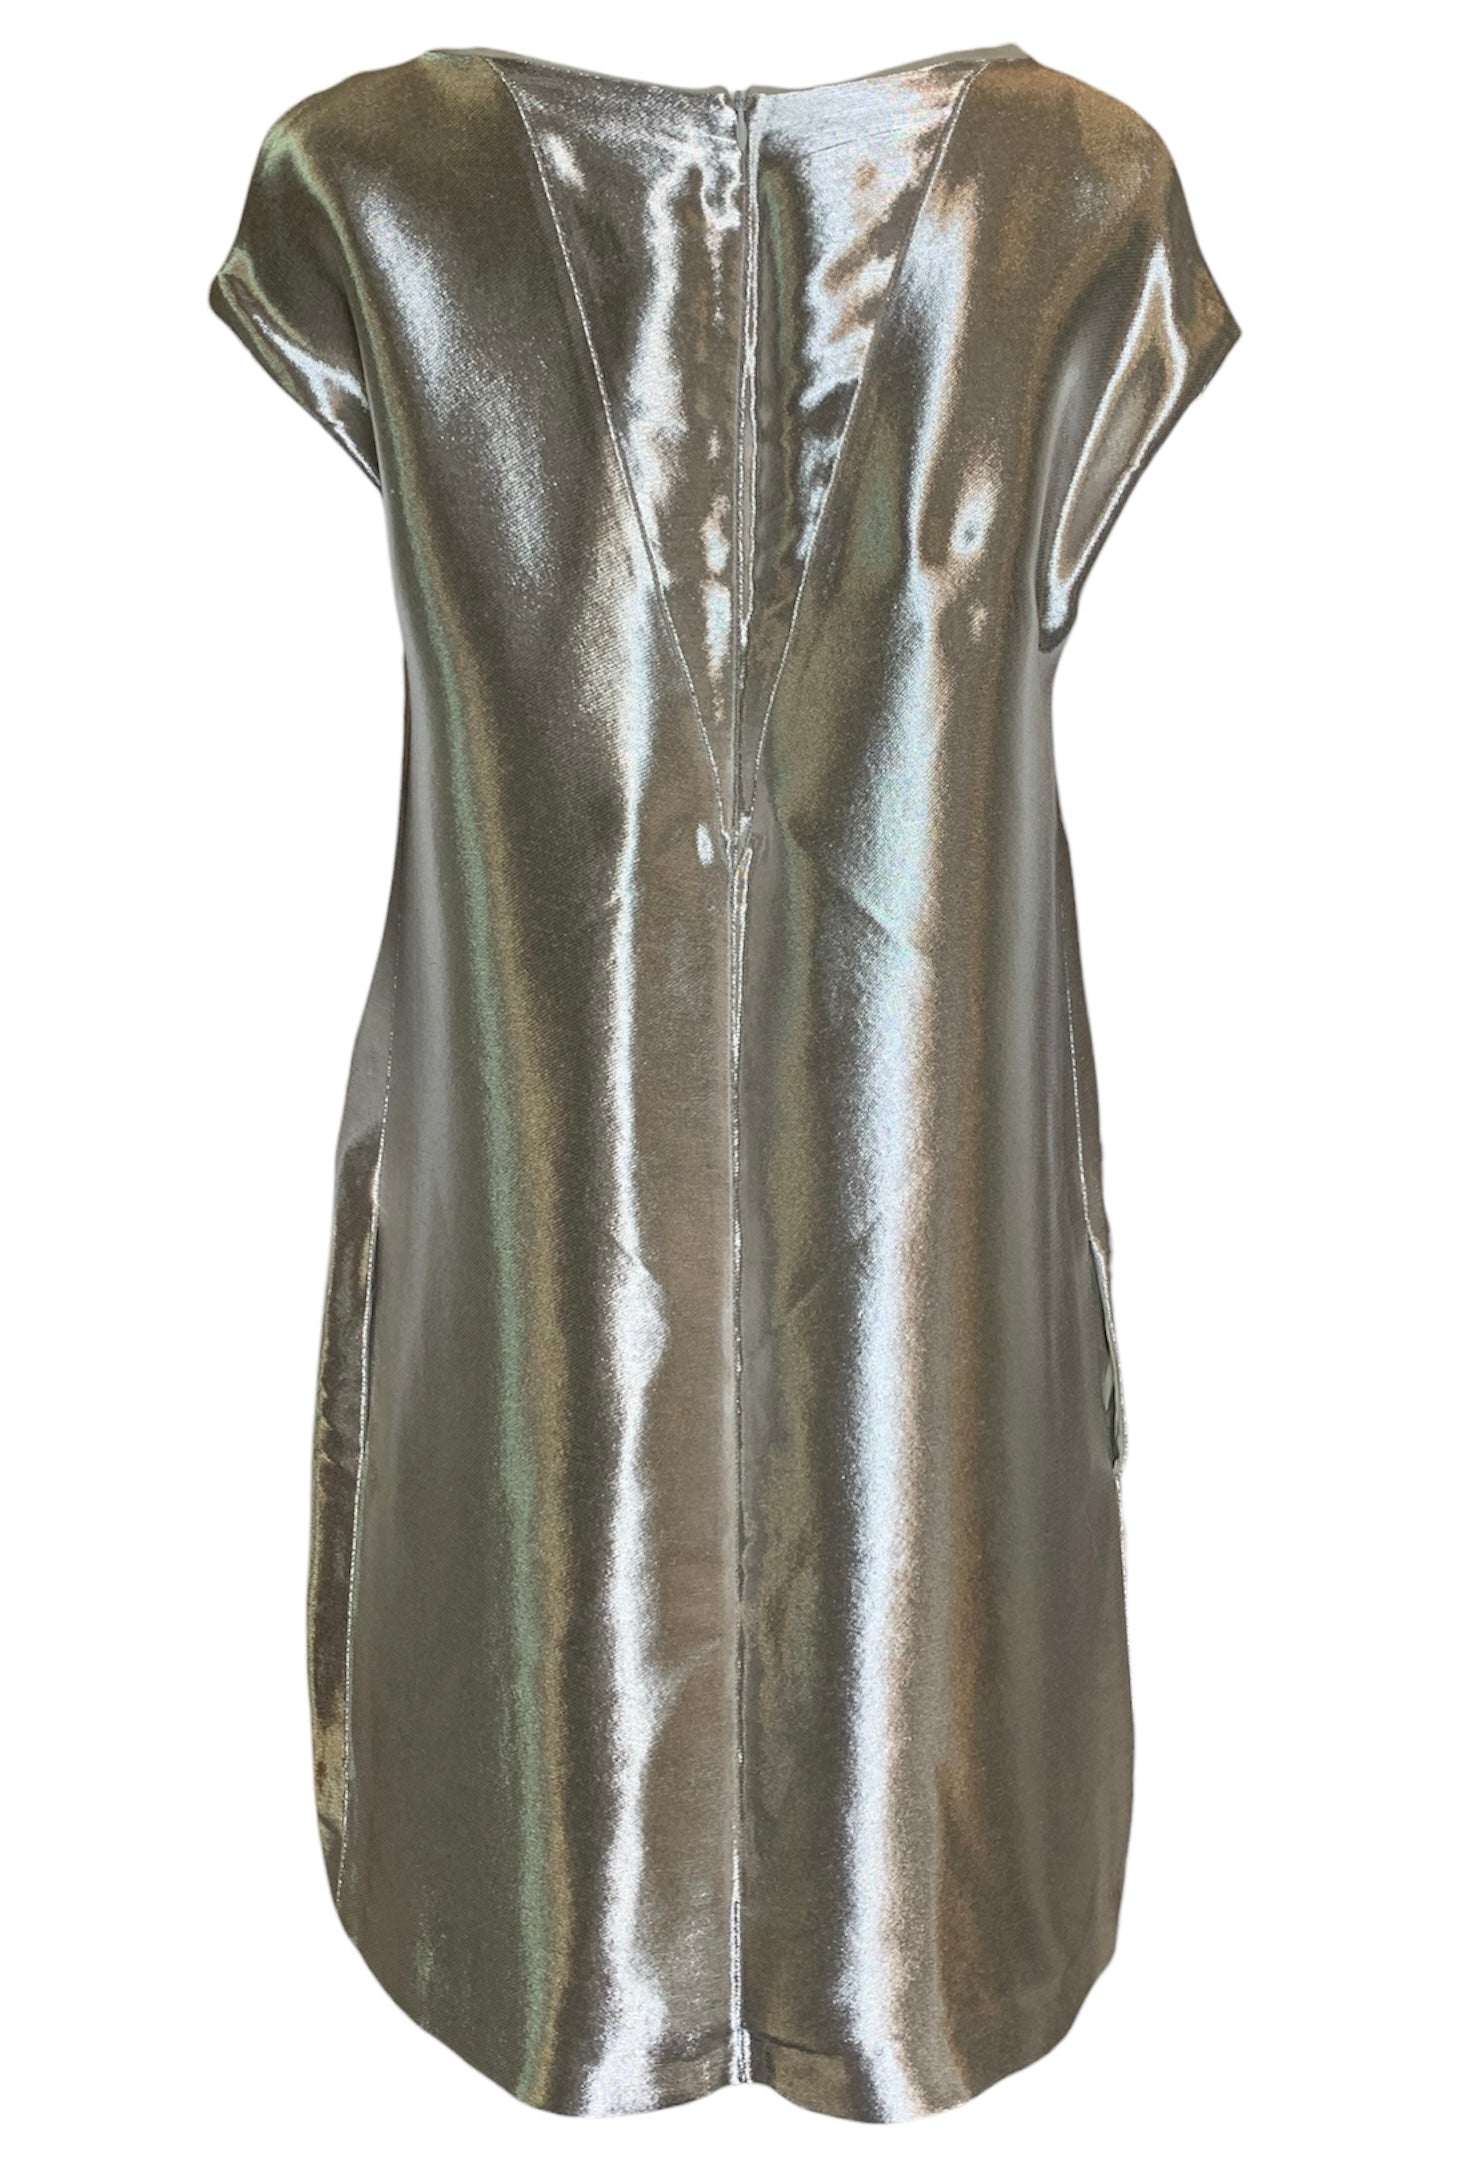 Fendi Silver Reflective Space Age Bow-Front Shift Dress BACK